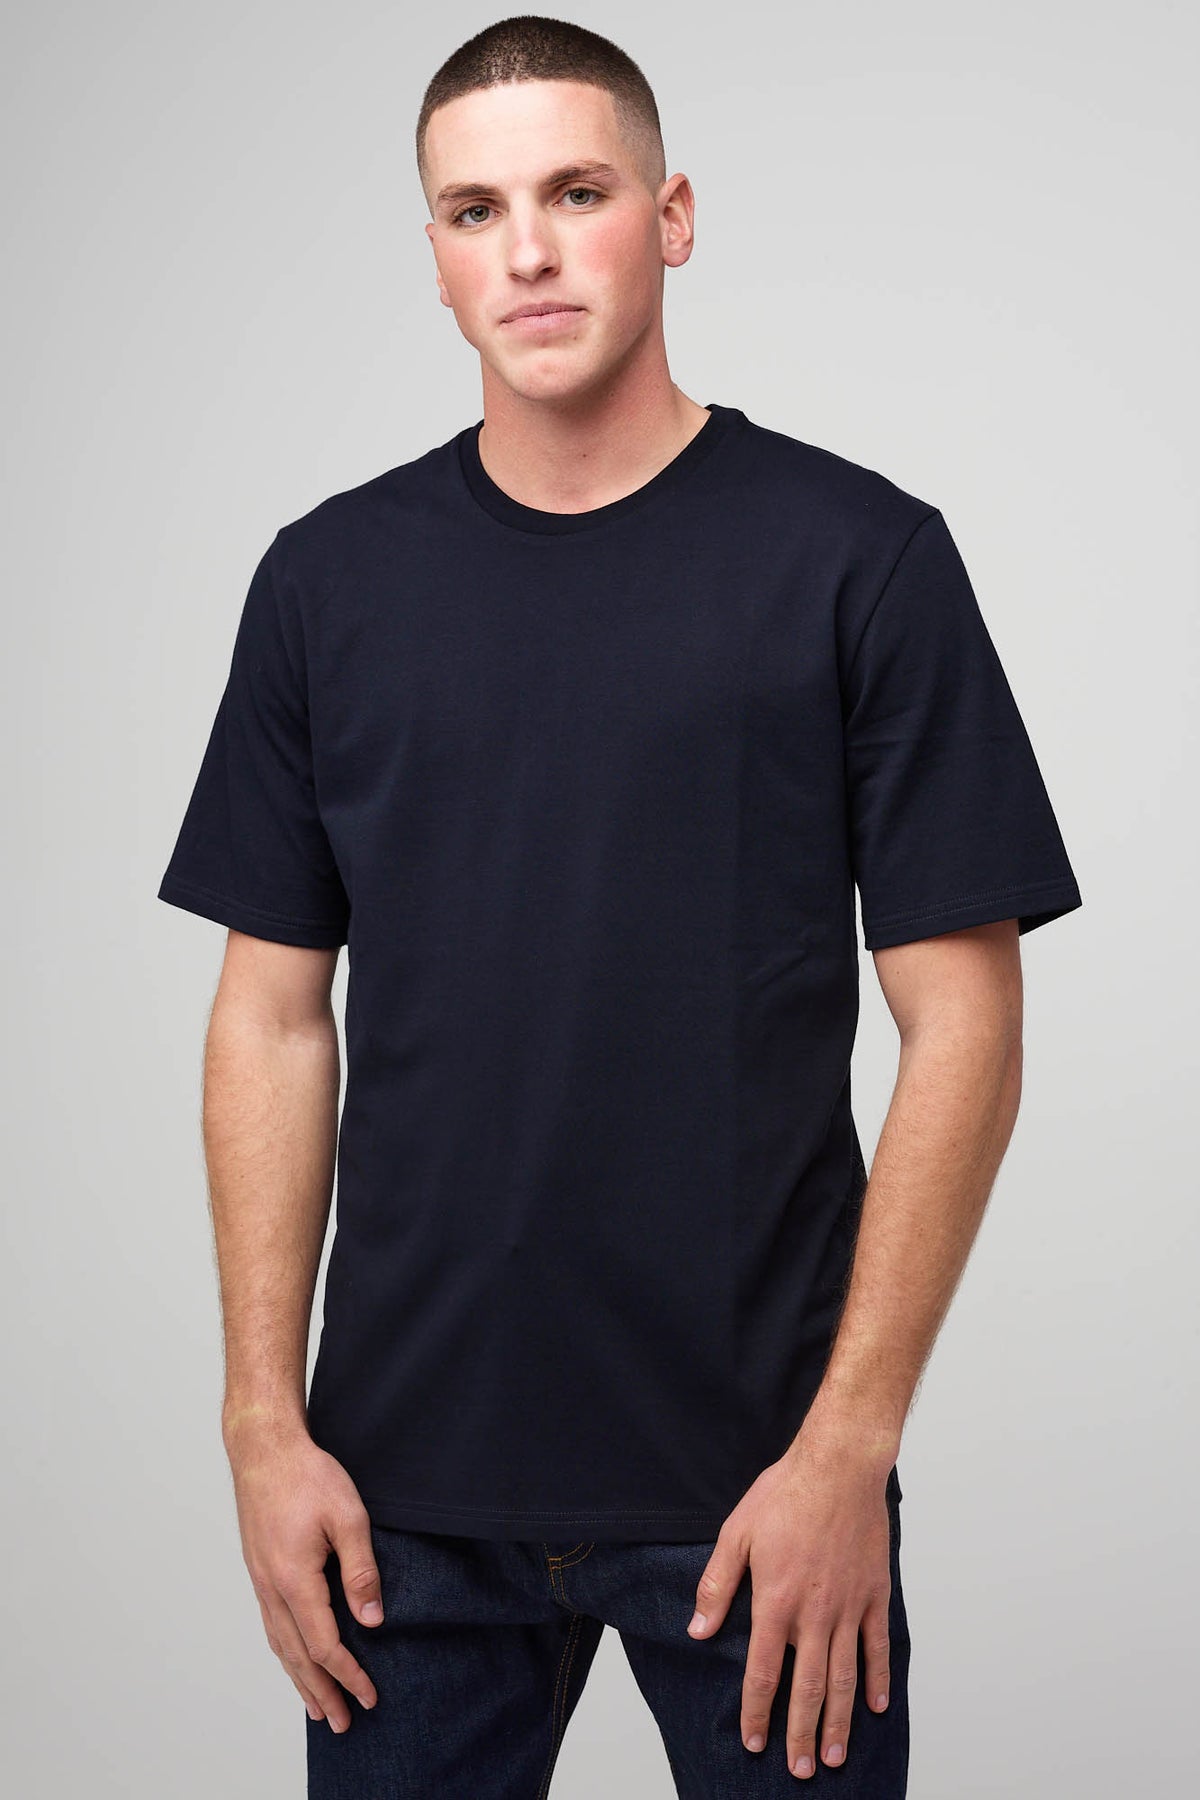 
            Thigh up image of male with a shaved head wearing short sleeve T-shirt navy